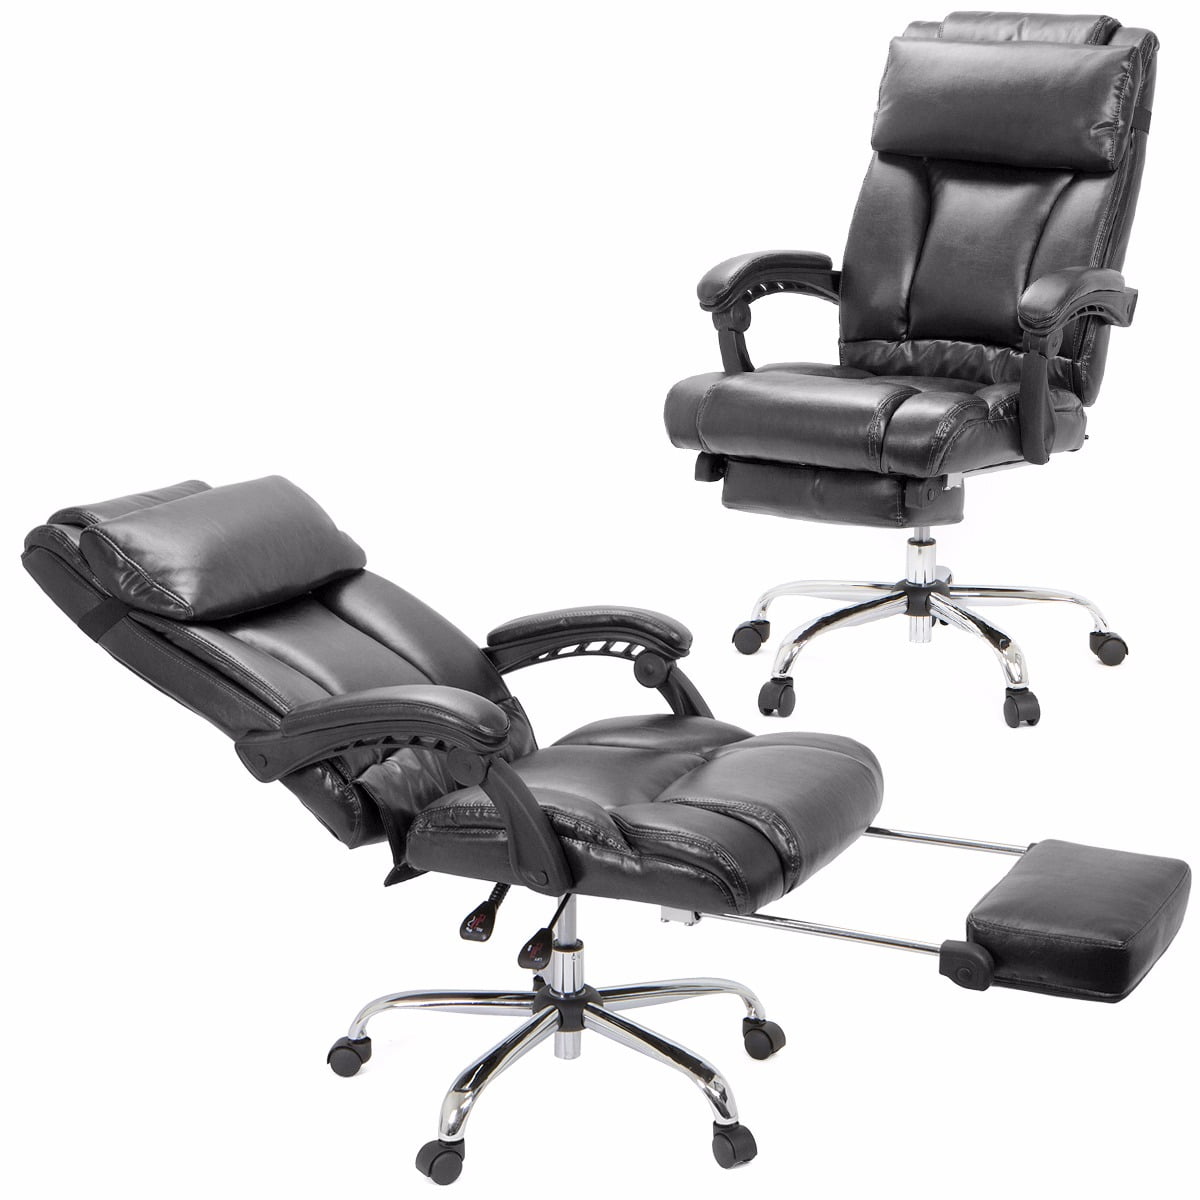 XtremepowerUS Ergonomic High Back PU Leather Office Chair